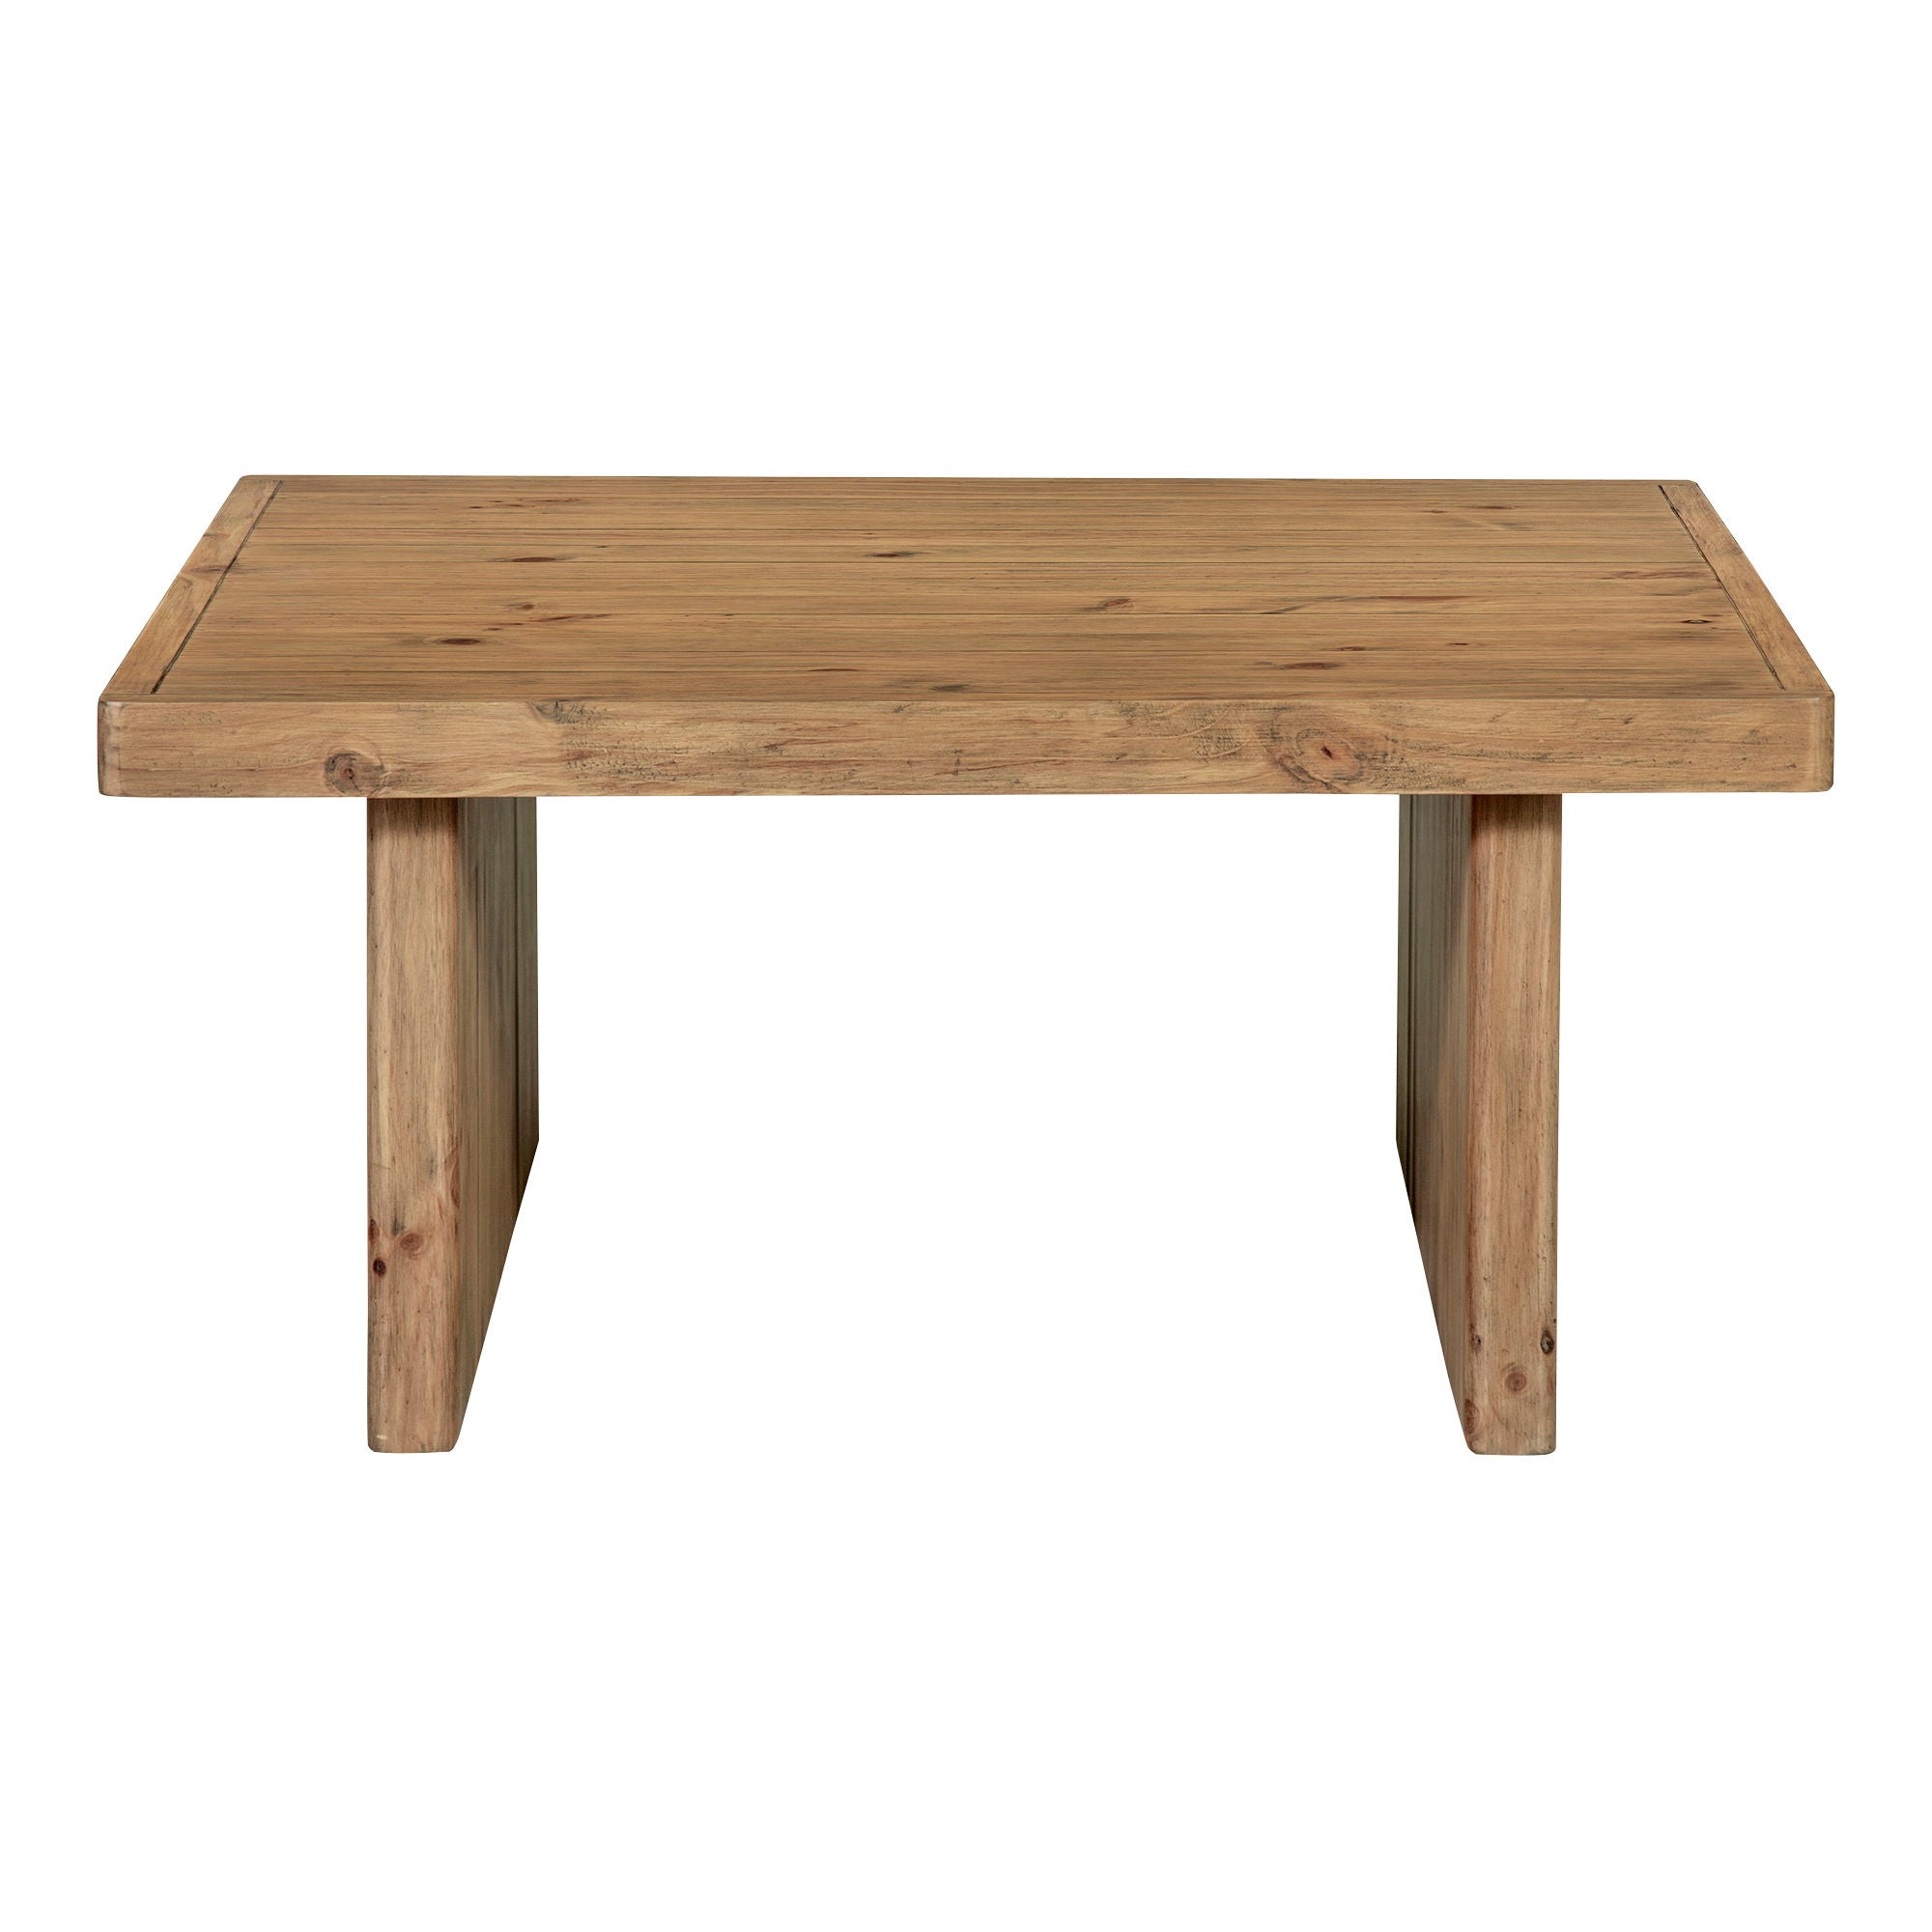 Monterey - Square Coffee Table - Aged Brown